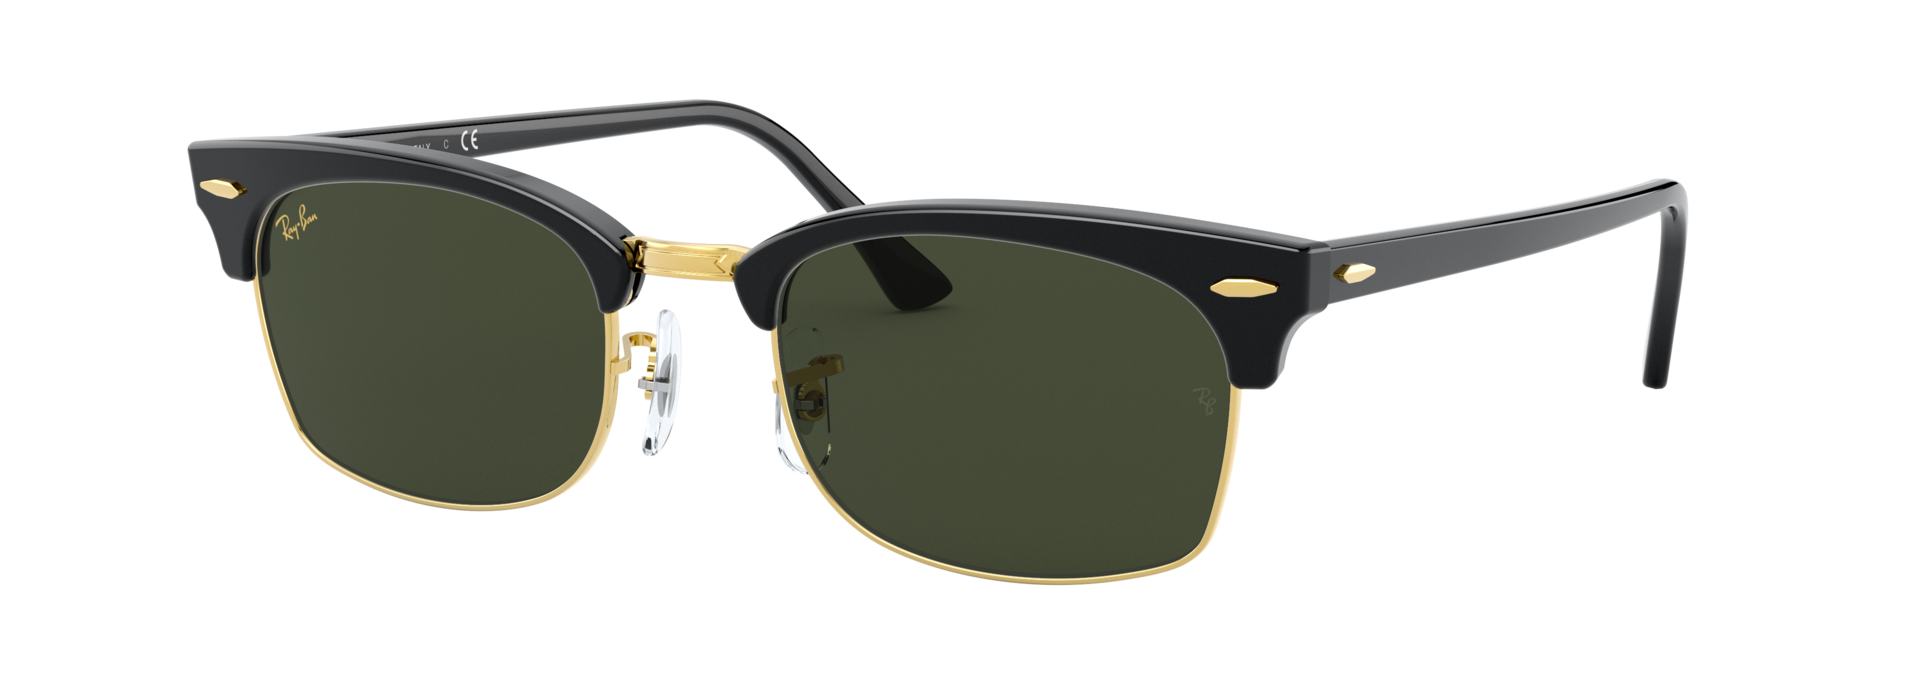 Ray-Ban RB3916 Clubmaster Square Sunglasses in Shiny Black with Green G-15 Lenses and Gold Ray-Ban Logo